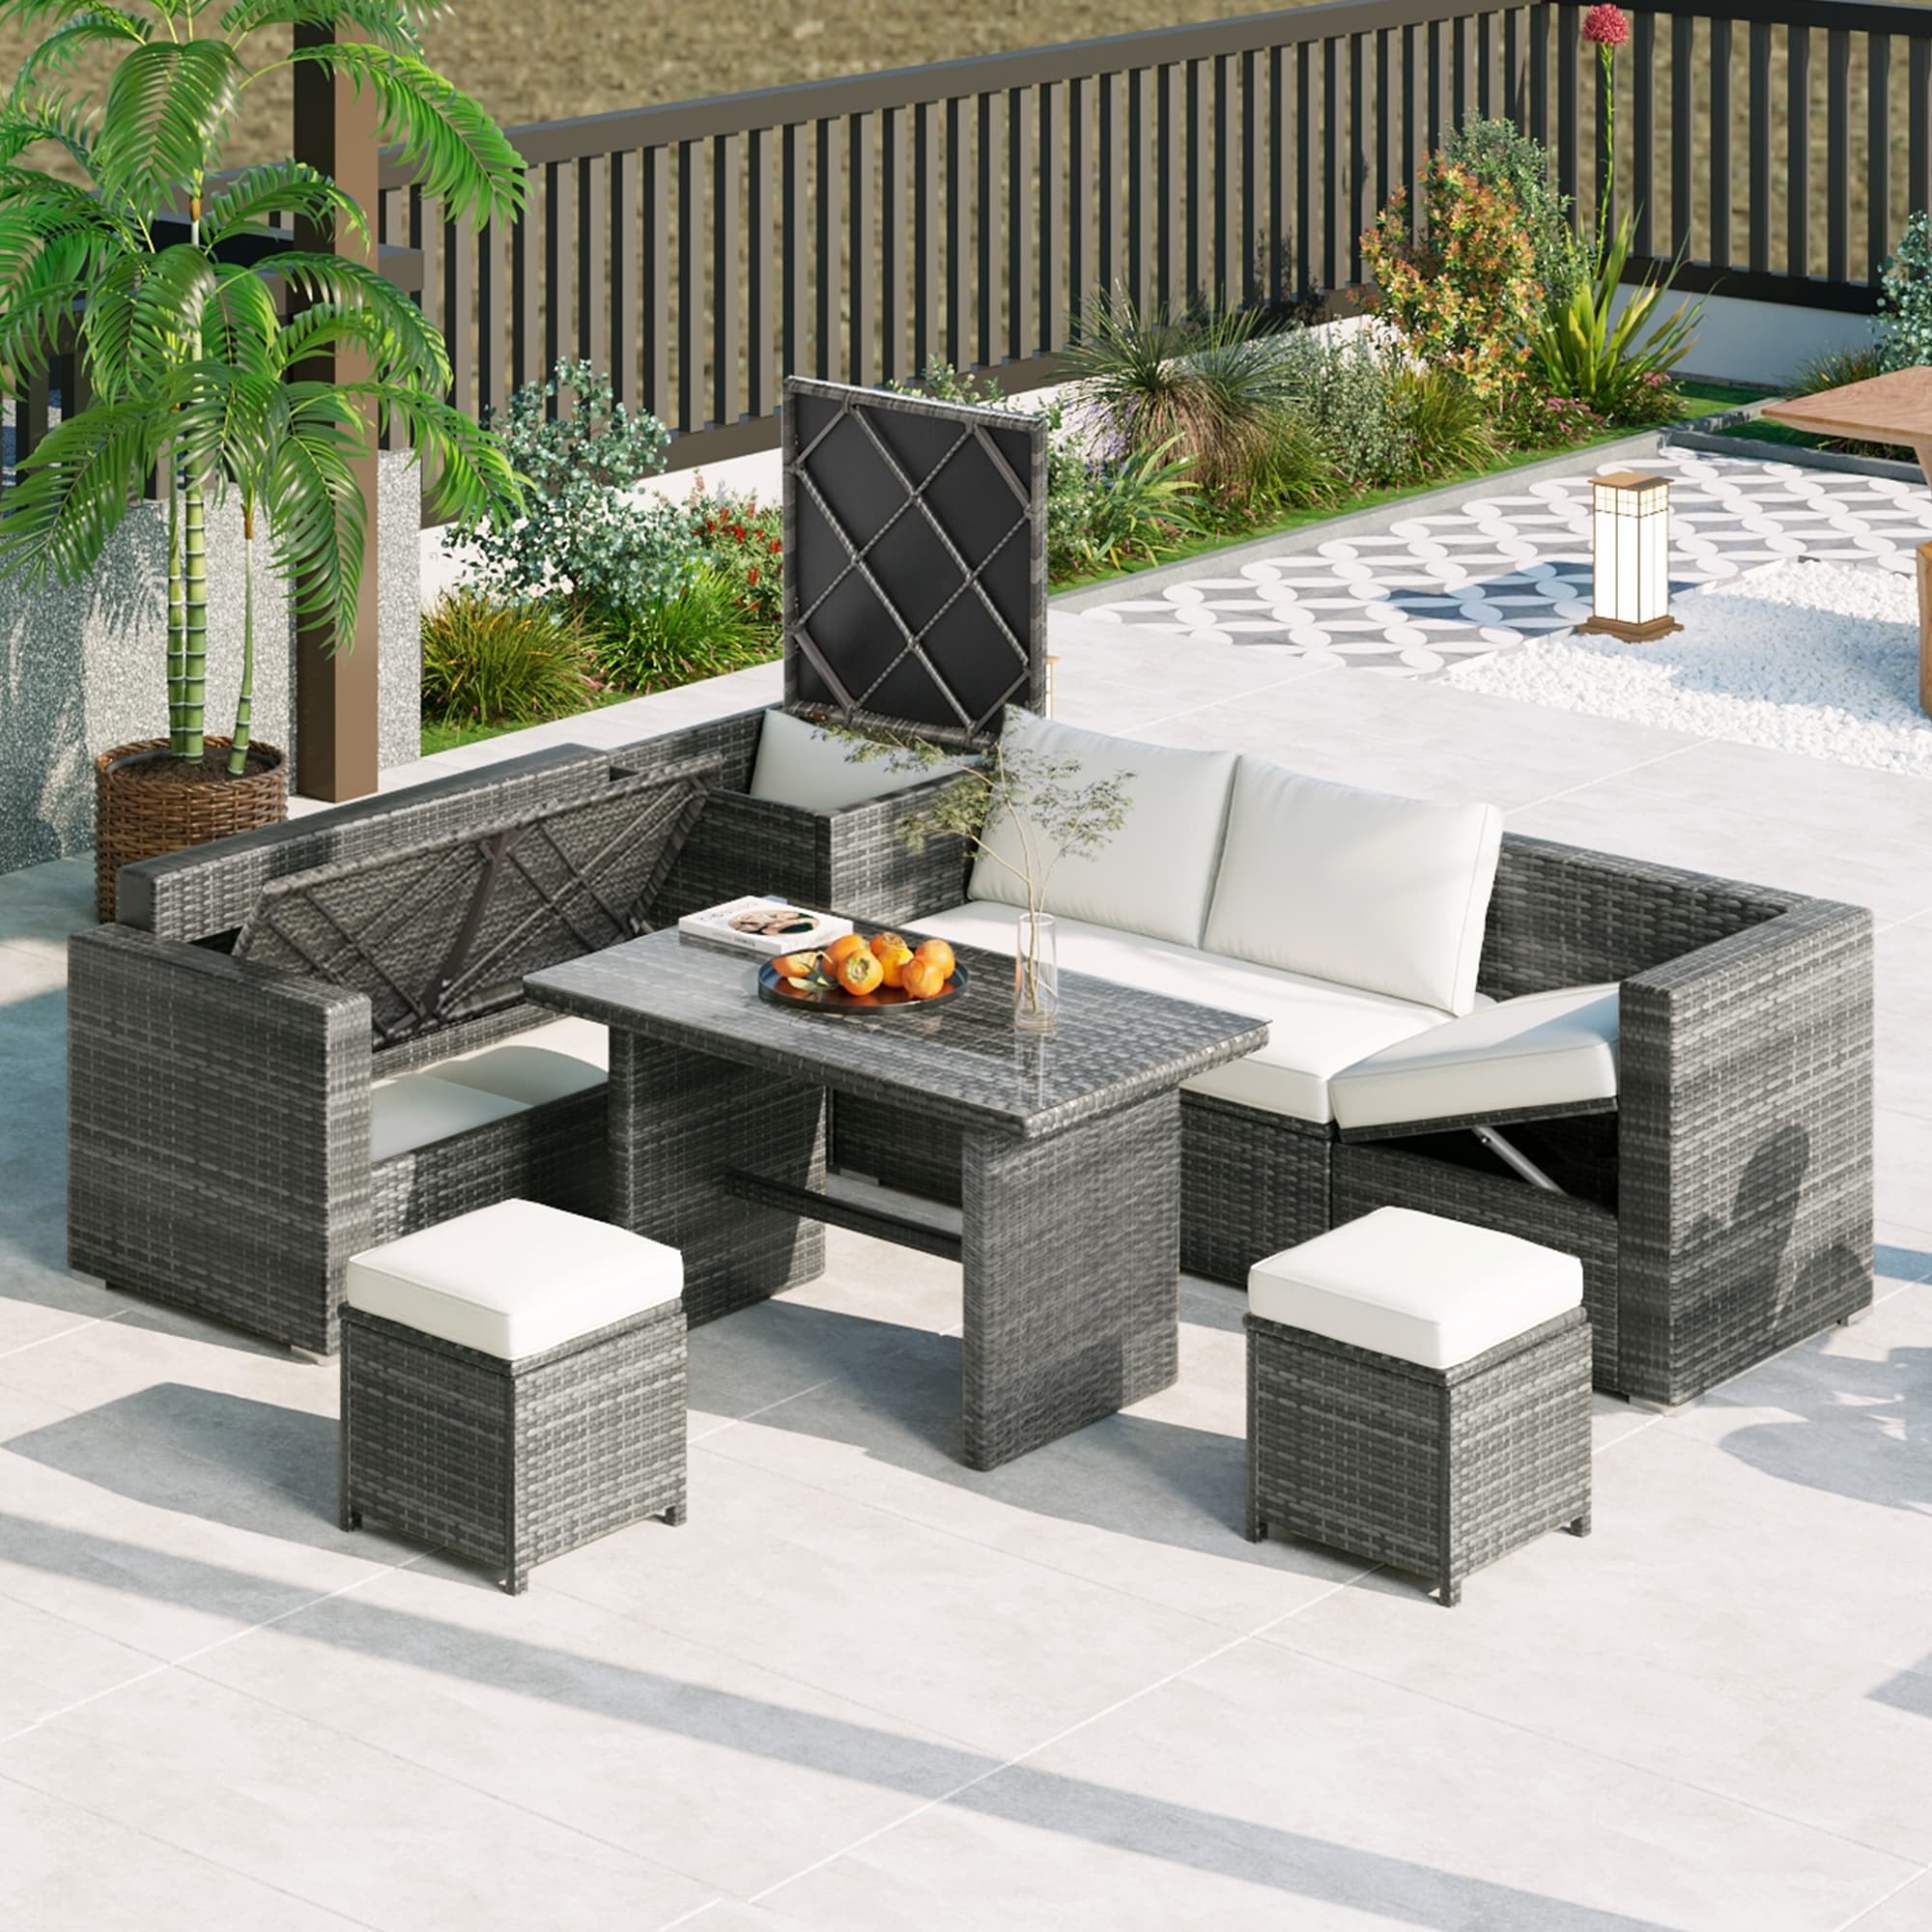 Optimize Your Outdoor Space: 6-piece Wicker Sofa Sectional Set With Storage Box